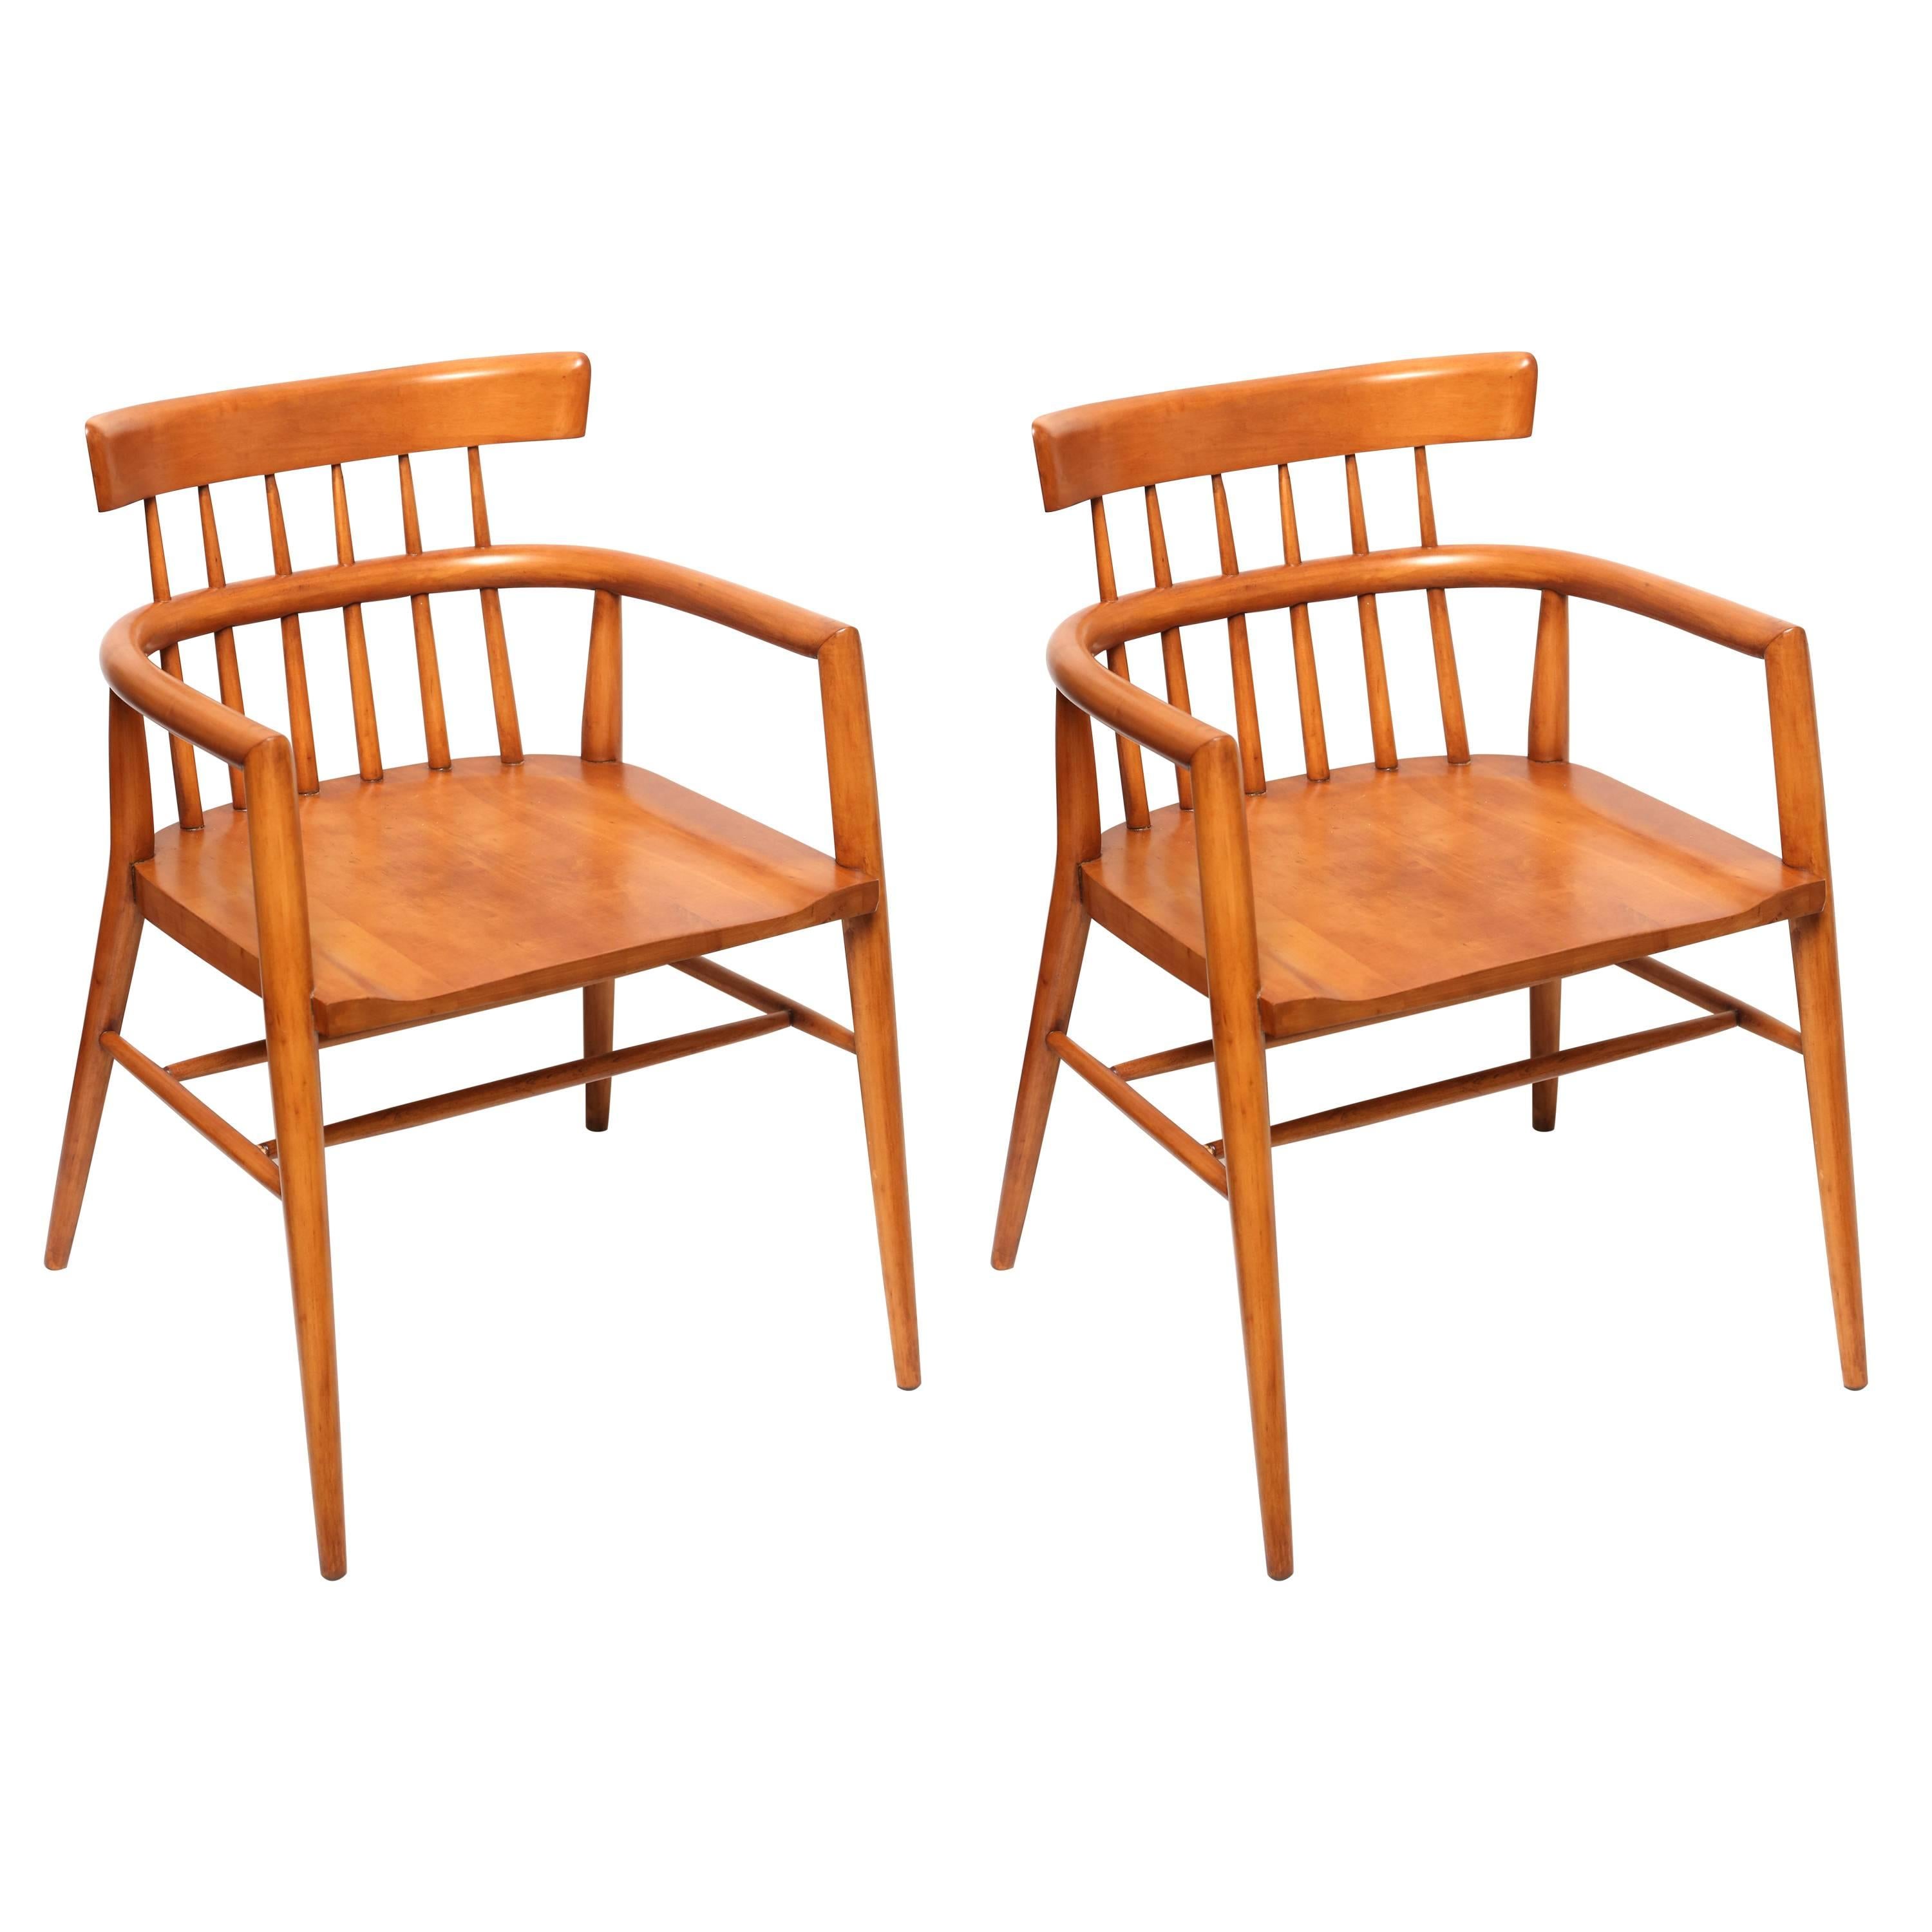 Pair of Paul McCobb Armed Wood Dining Chairs, 1960s